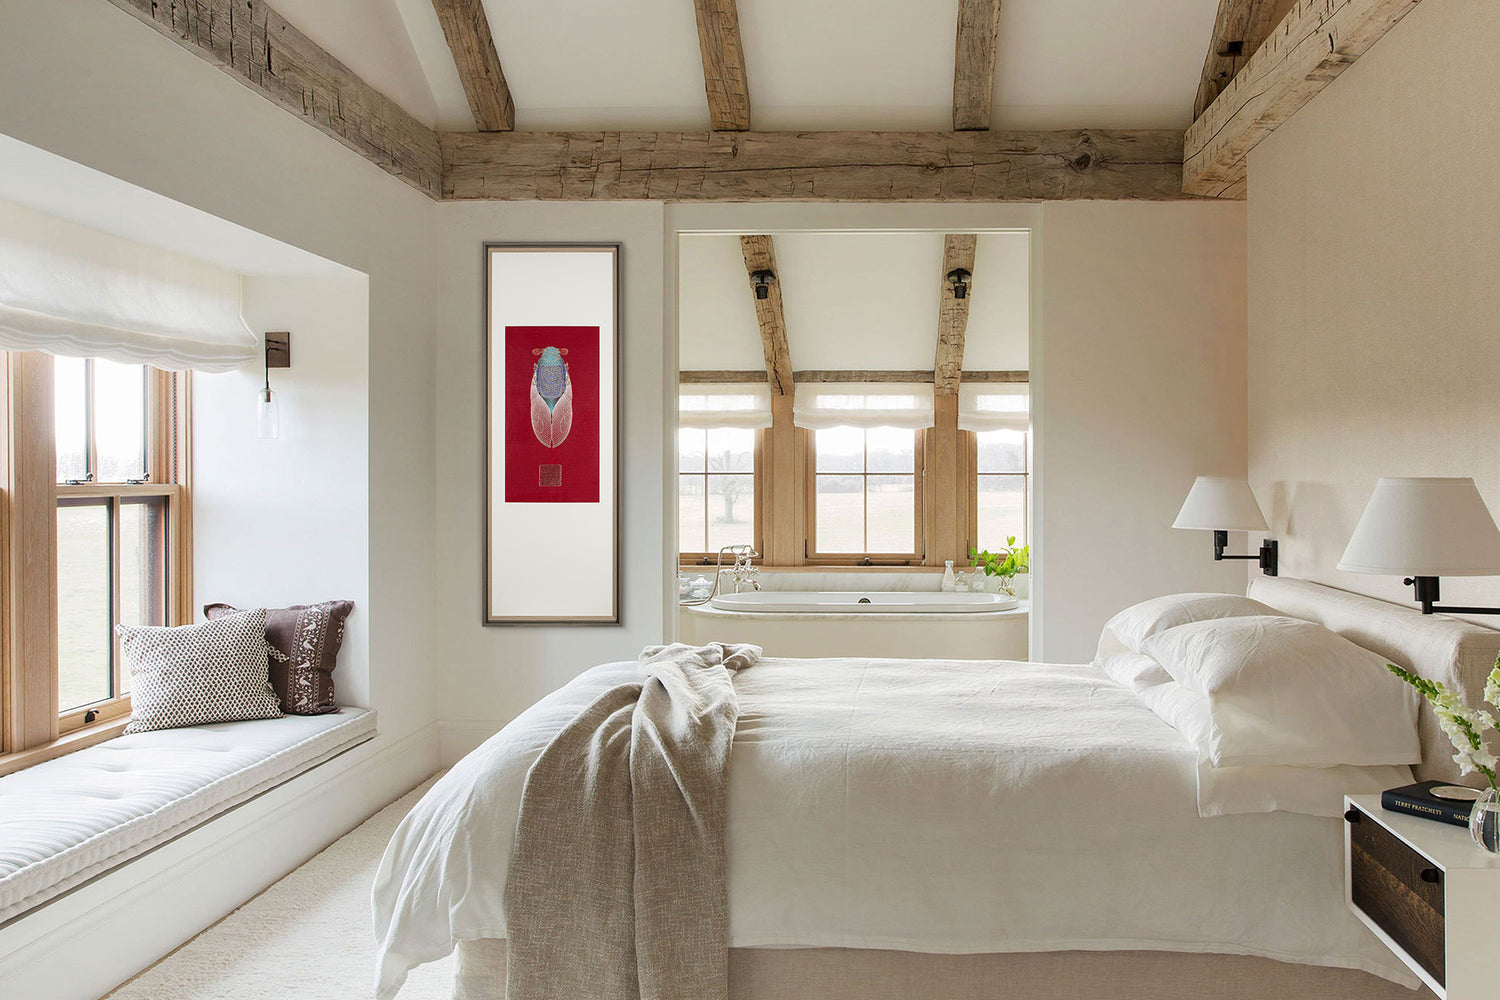 A bedroom with white bedding and wooden ceiling beams. A framed embroidery artwork featuring a cicada design hangs on the wall.